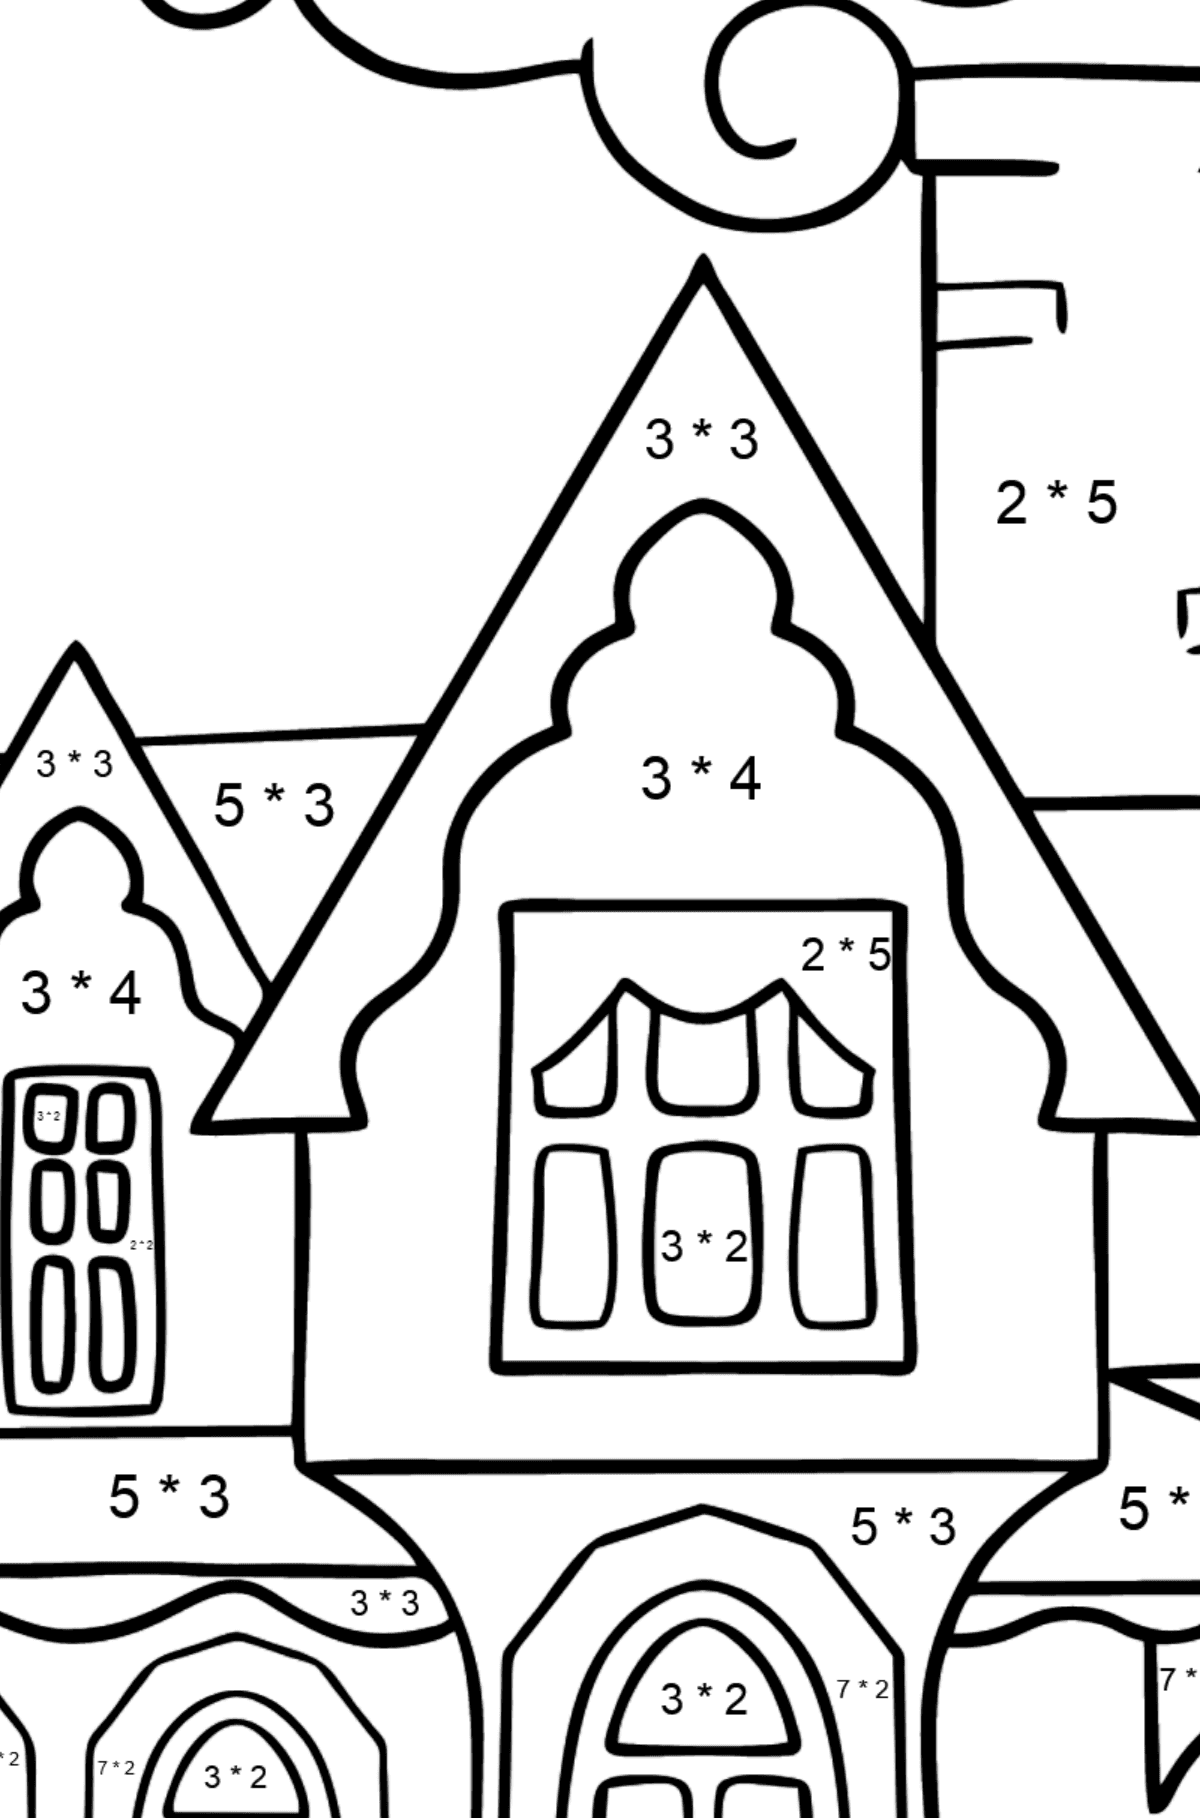 Coloring Page - A Miraculous House - Math Coloring - Multiplication for Kids